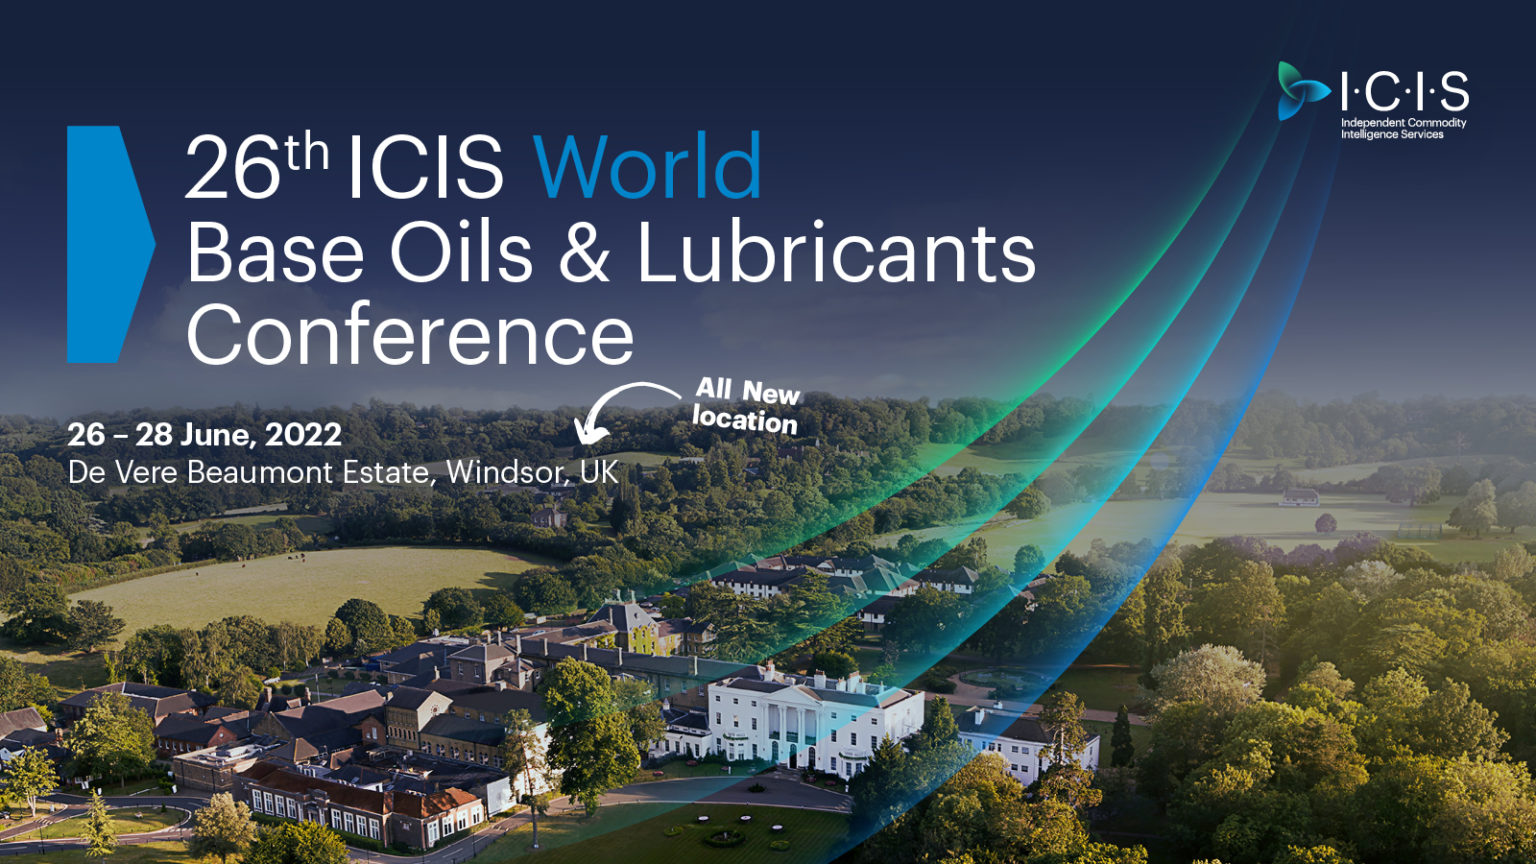 26th ICIS World Base Oils & Lubricants Conference UEIL